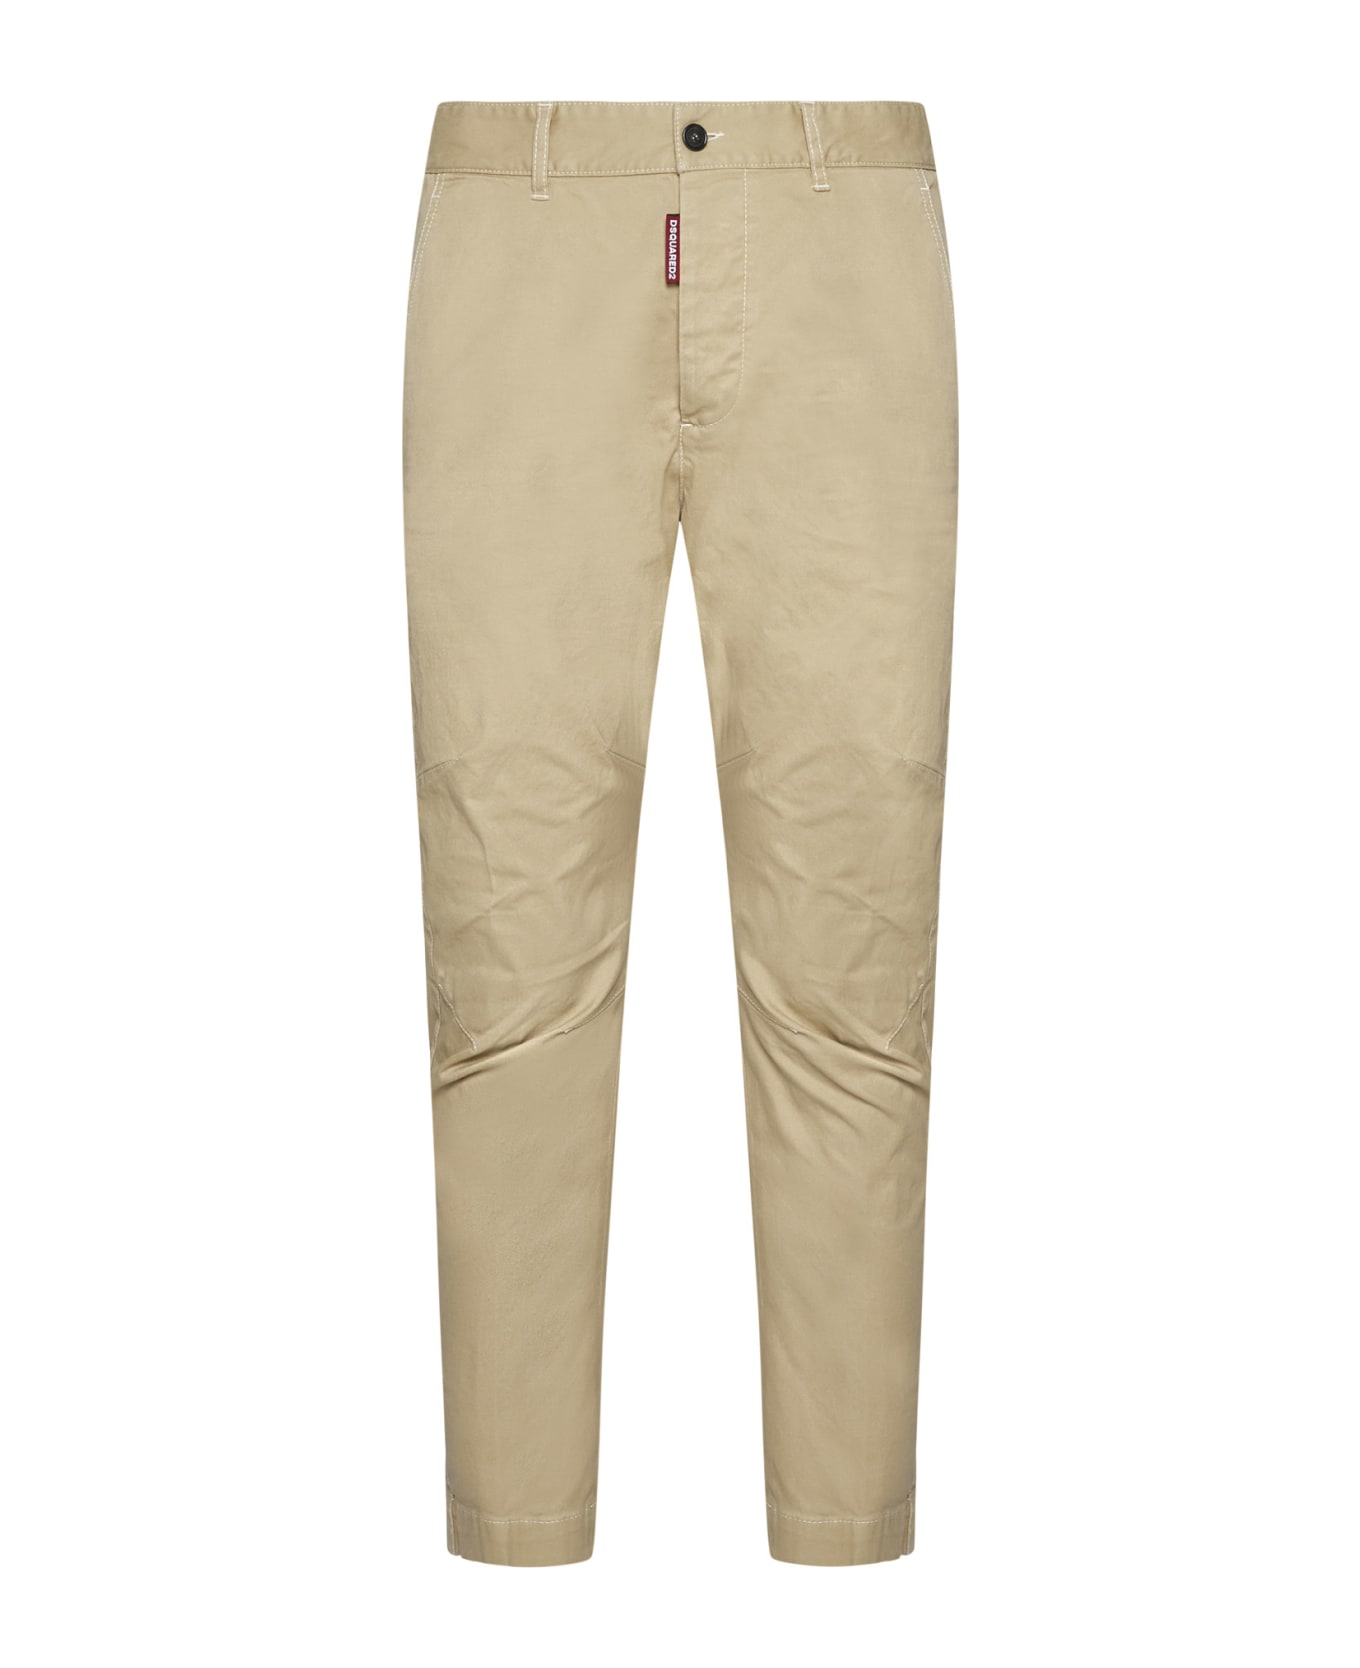 Dsquared2 Buttoned Zip Chino Trousers - Nude & Neutrals ボトムス